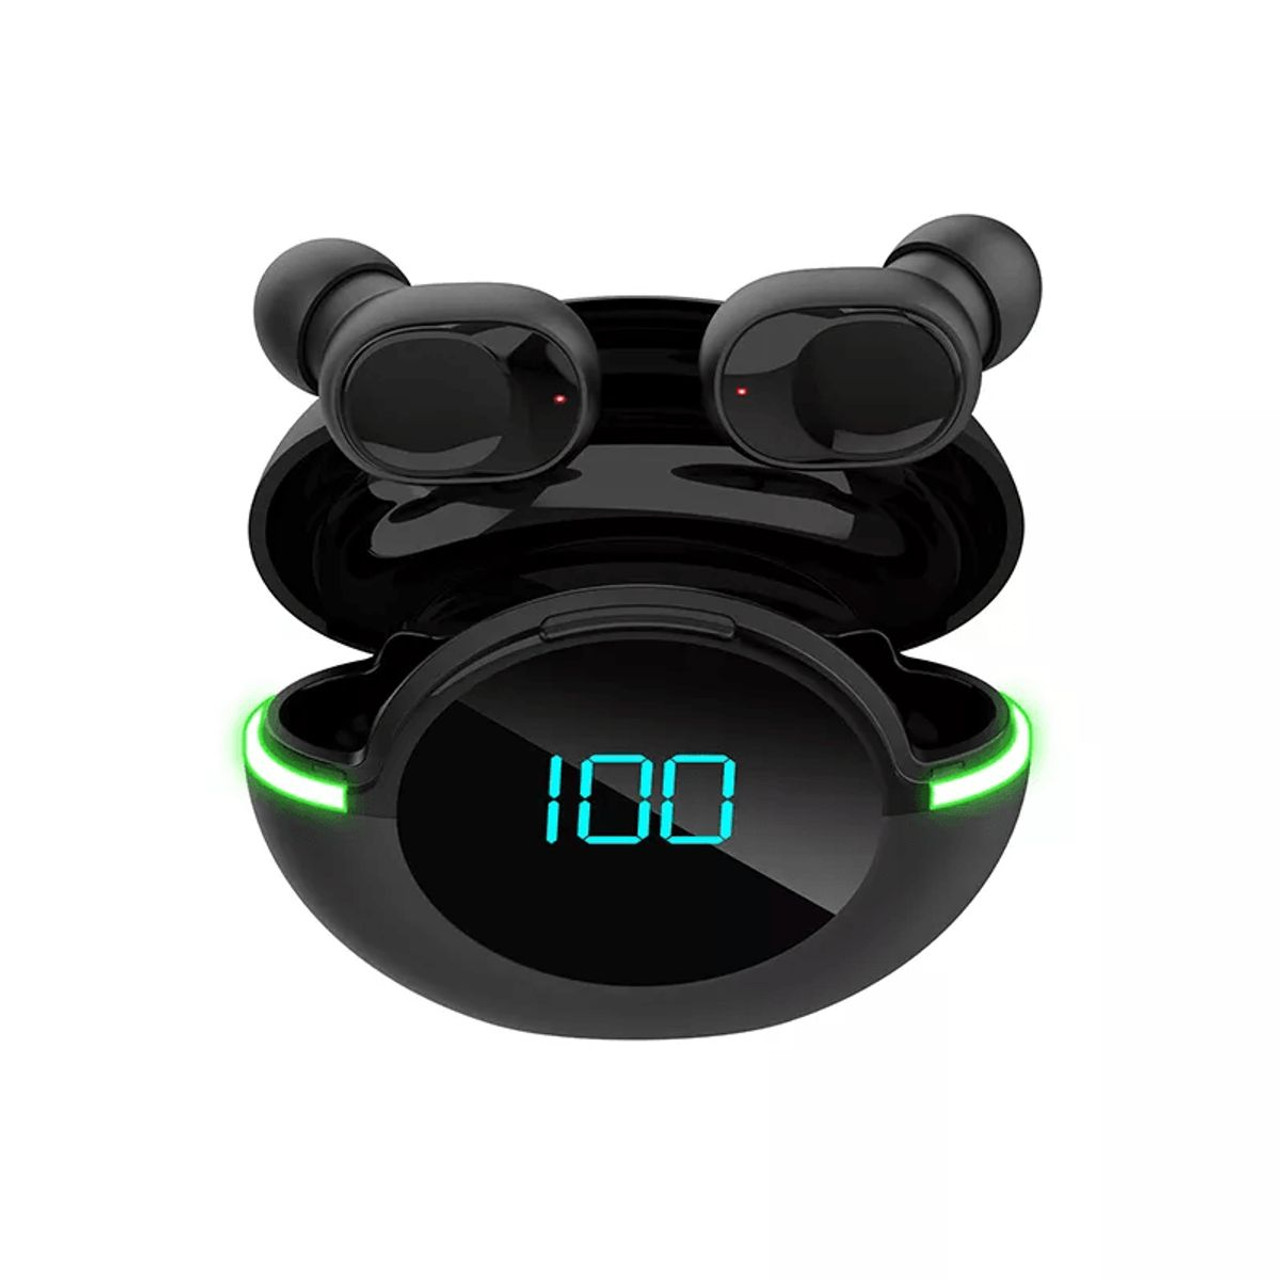 VYSN BestBuds TWS Earbuds with Wireless Digital Display Charging Case product image